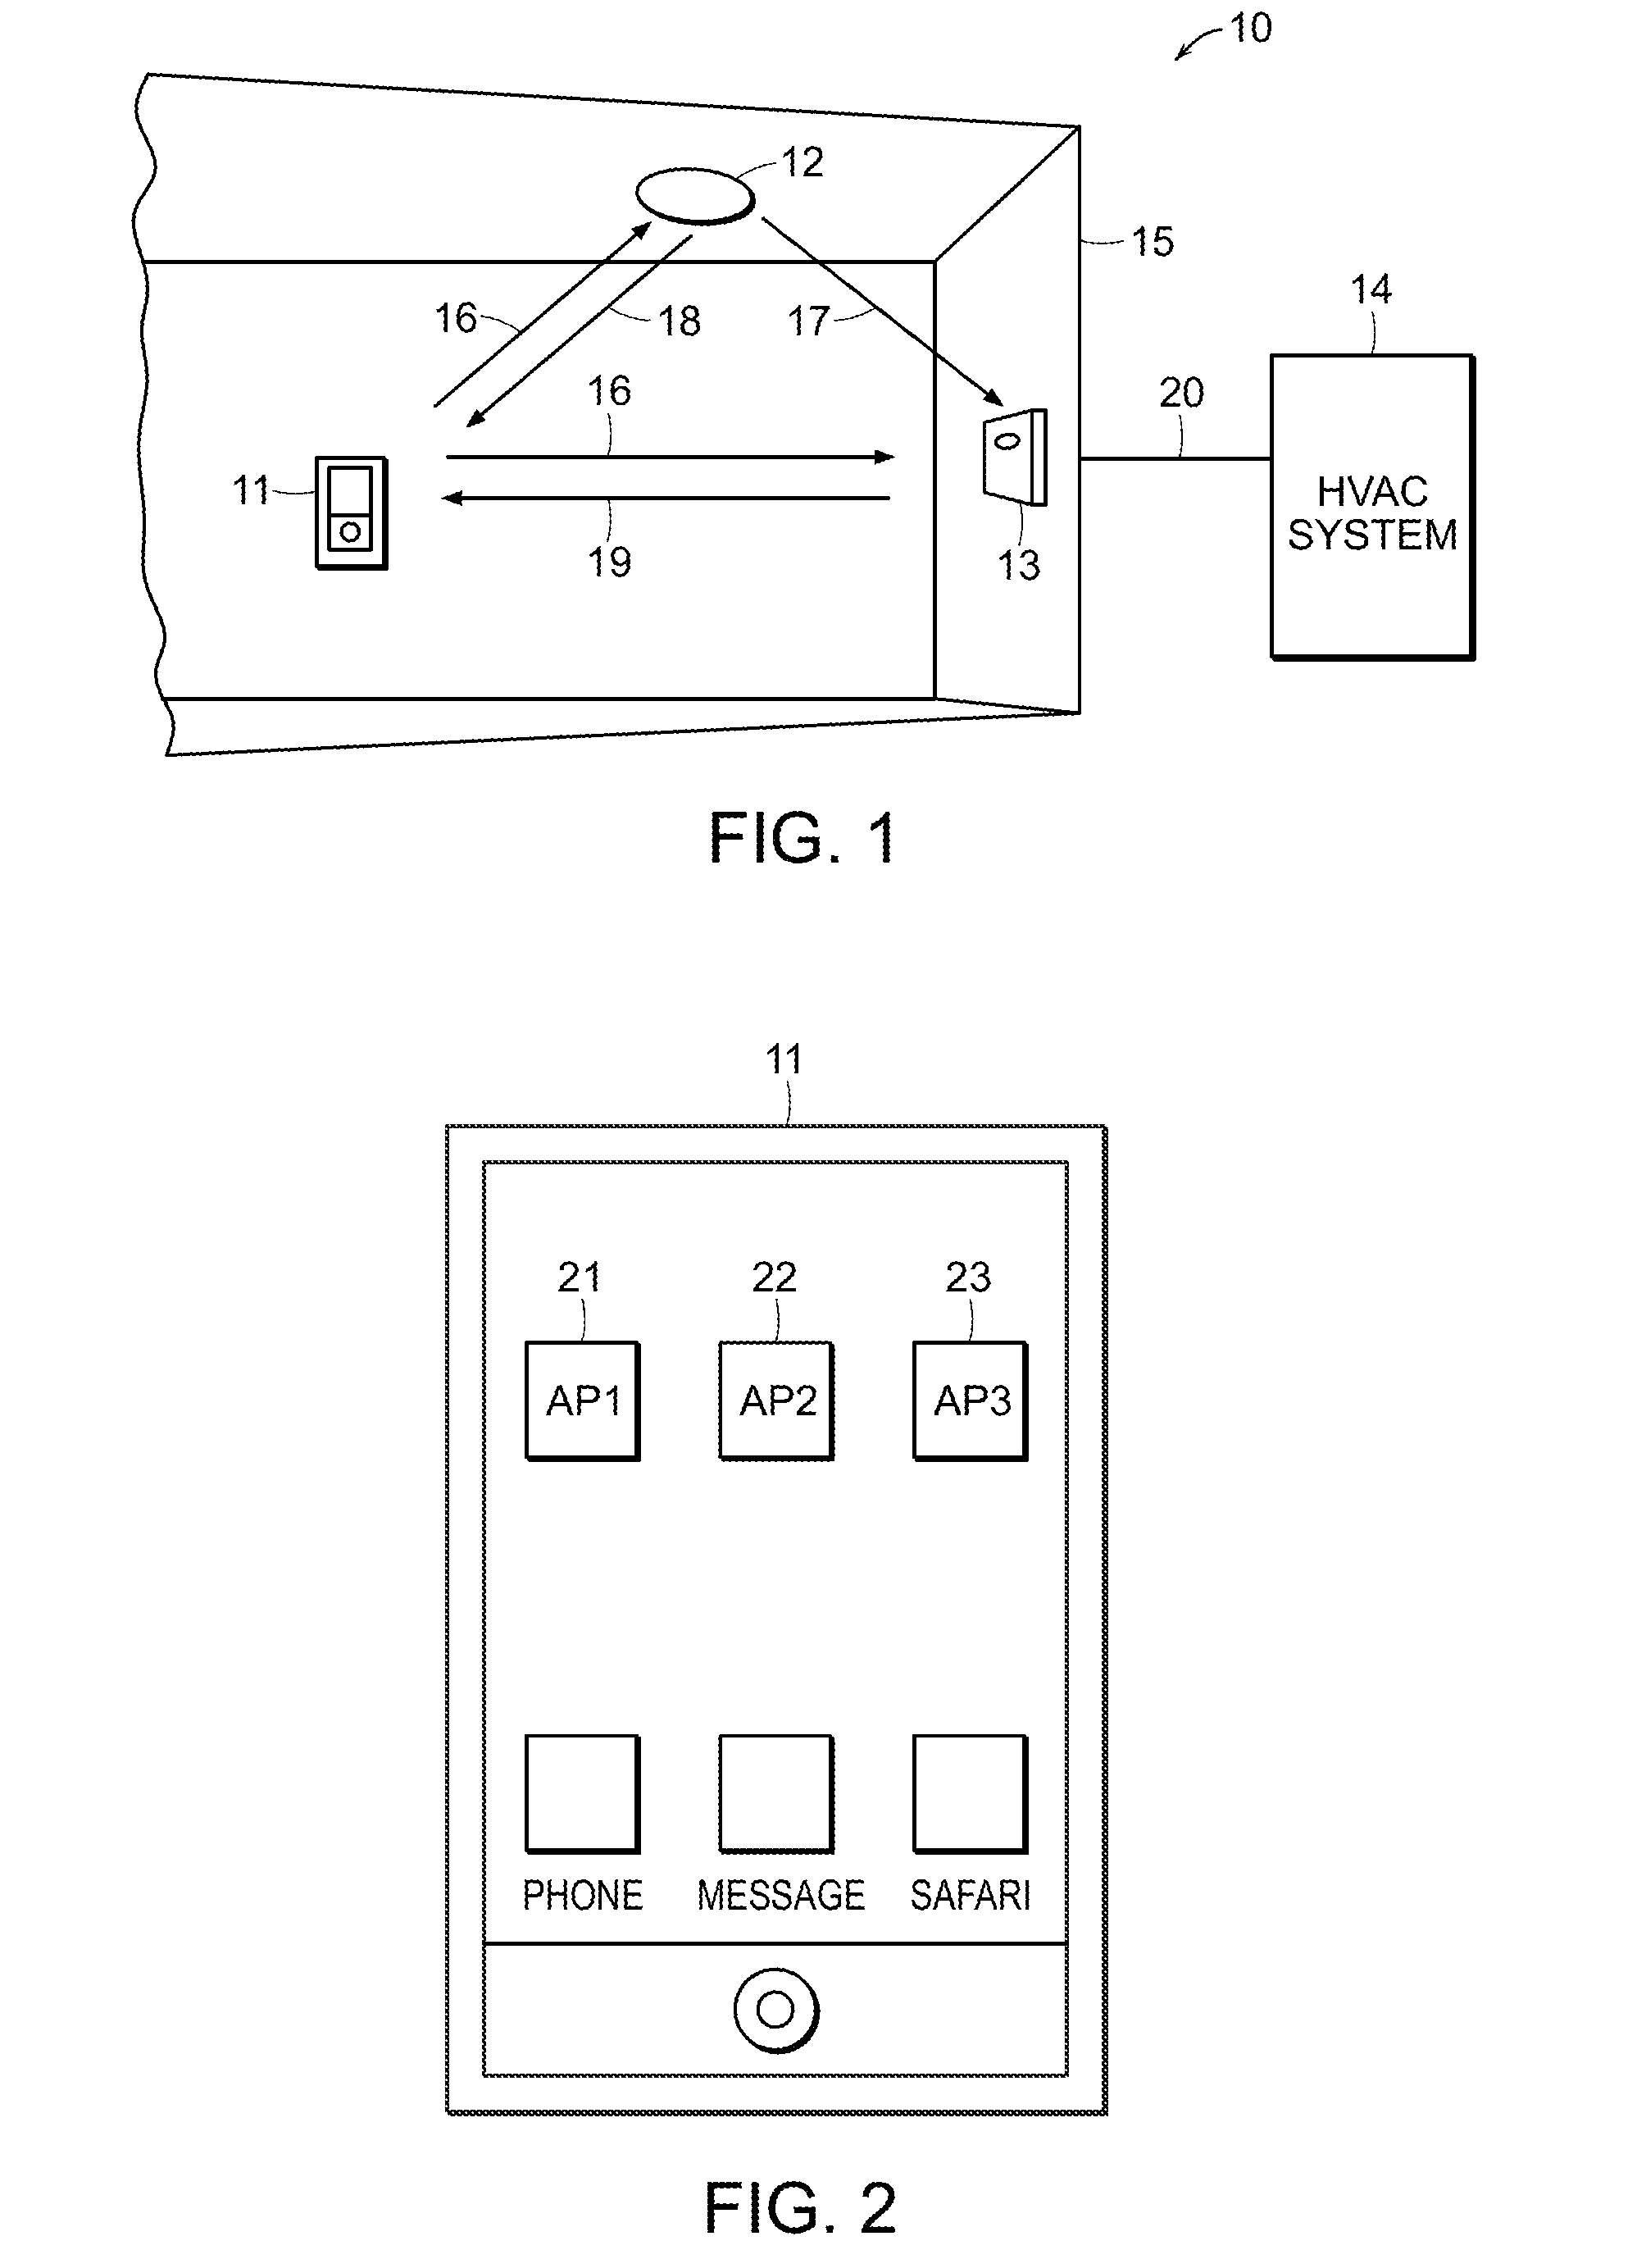 System and Method of Extending the Communication Range in a Visible Light Communication System